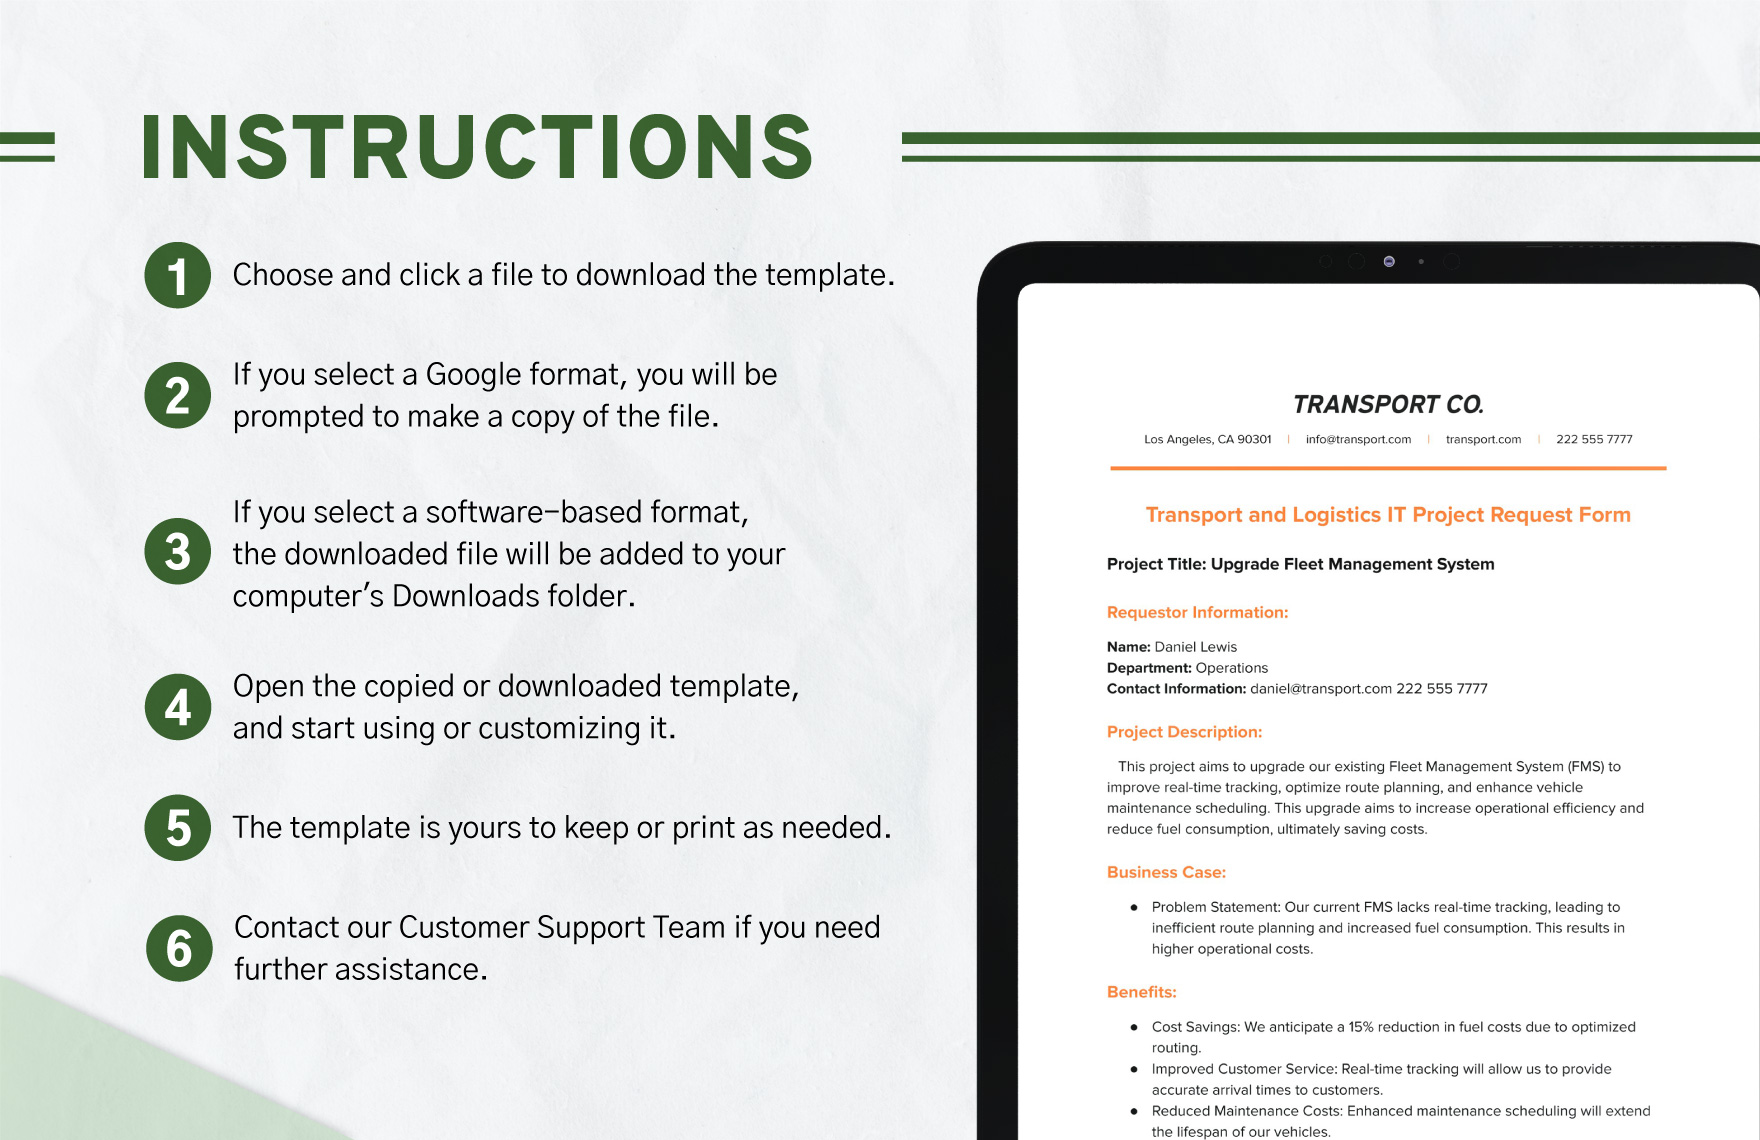 Transport and Logistics IT Project Request Form Template